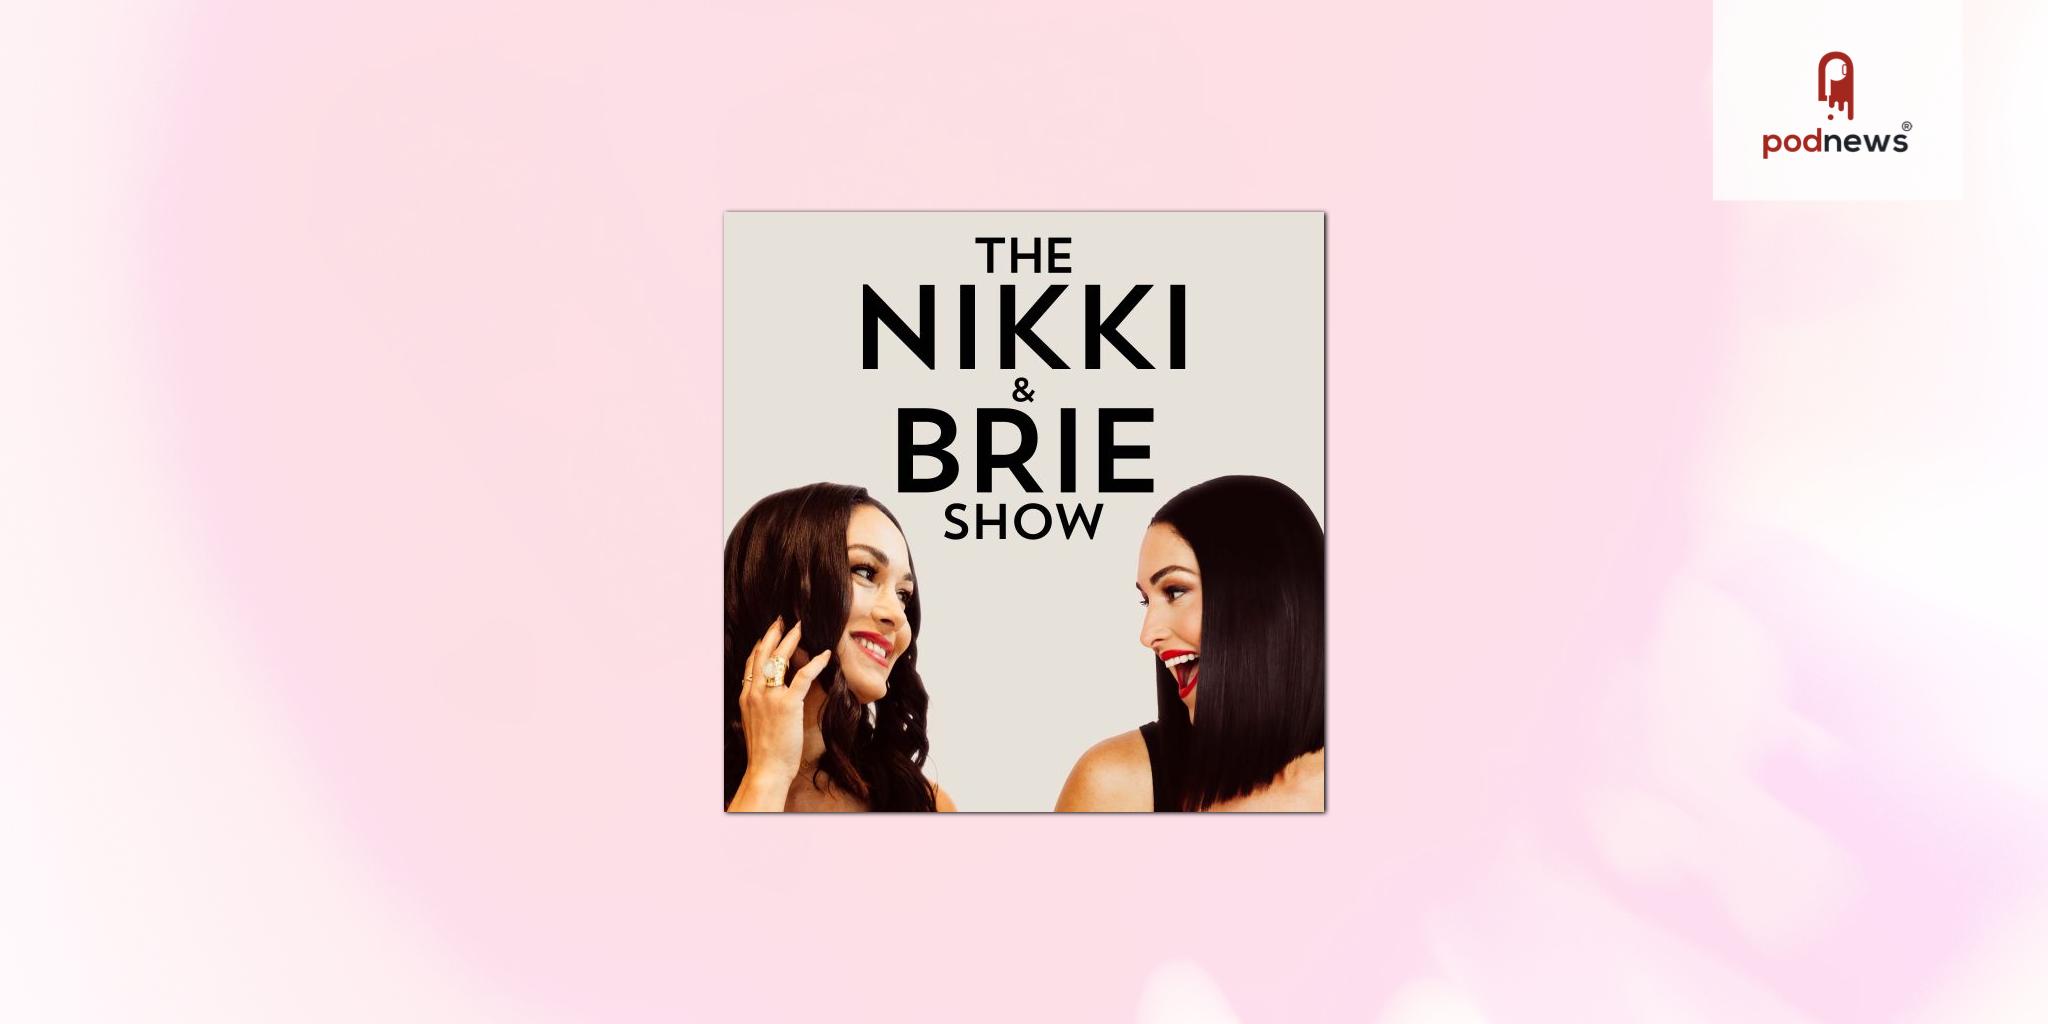 SiriusXM's Stitcher signs The Bellas podcast, hosted by Brie and Nikki Bella